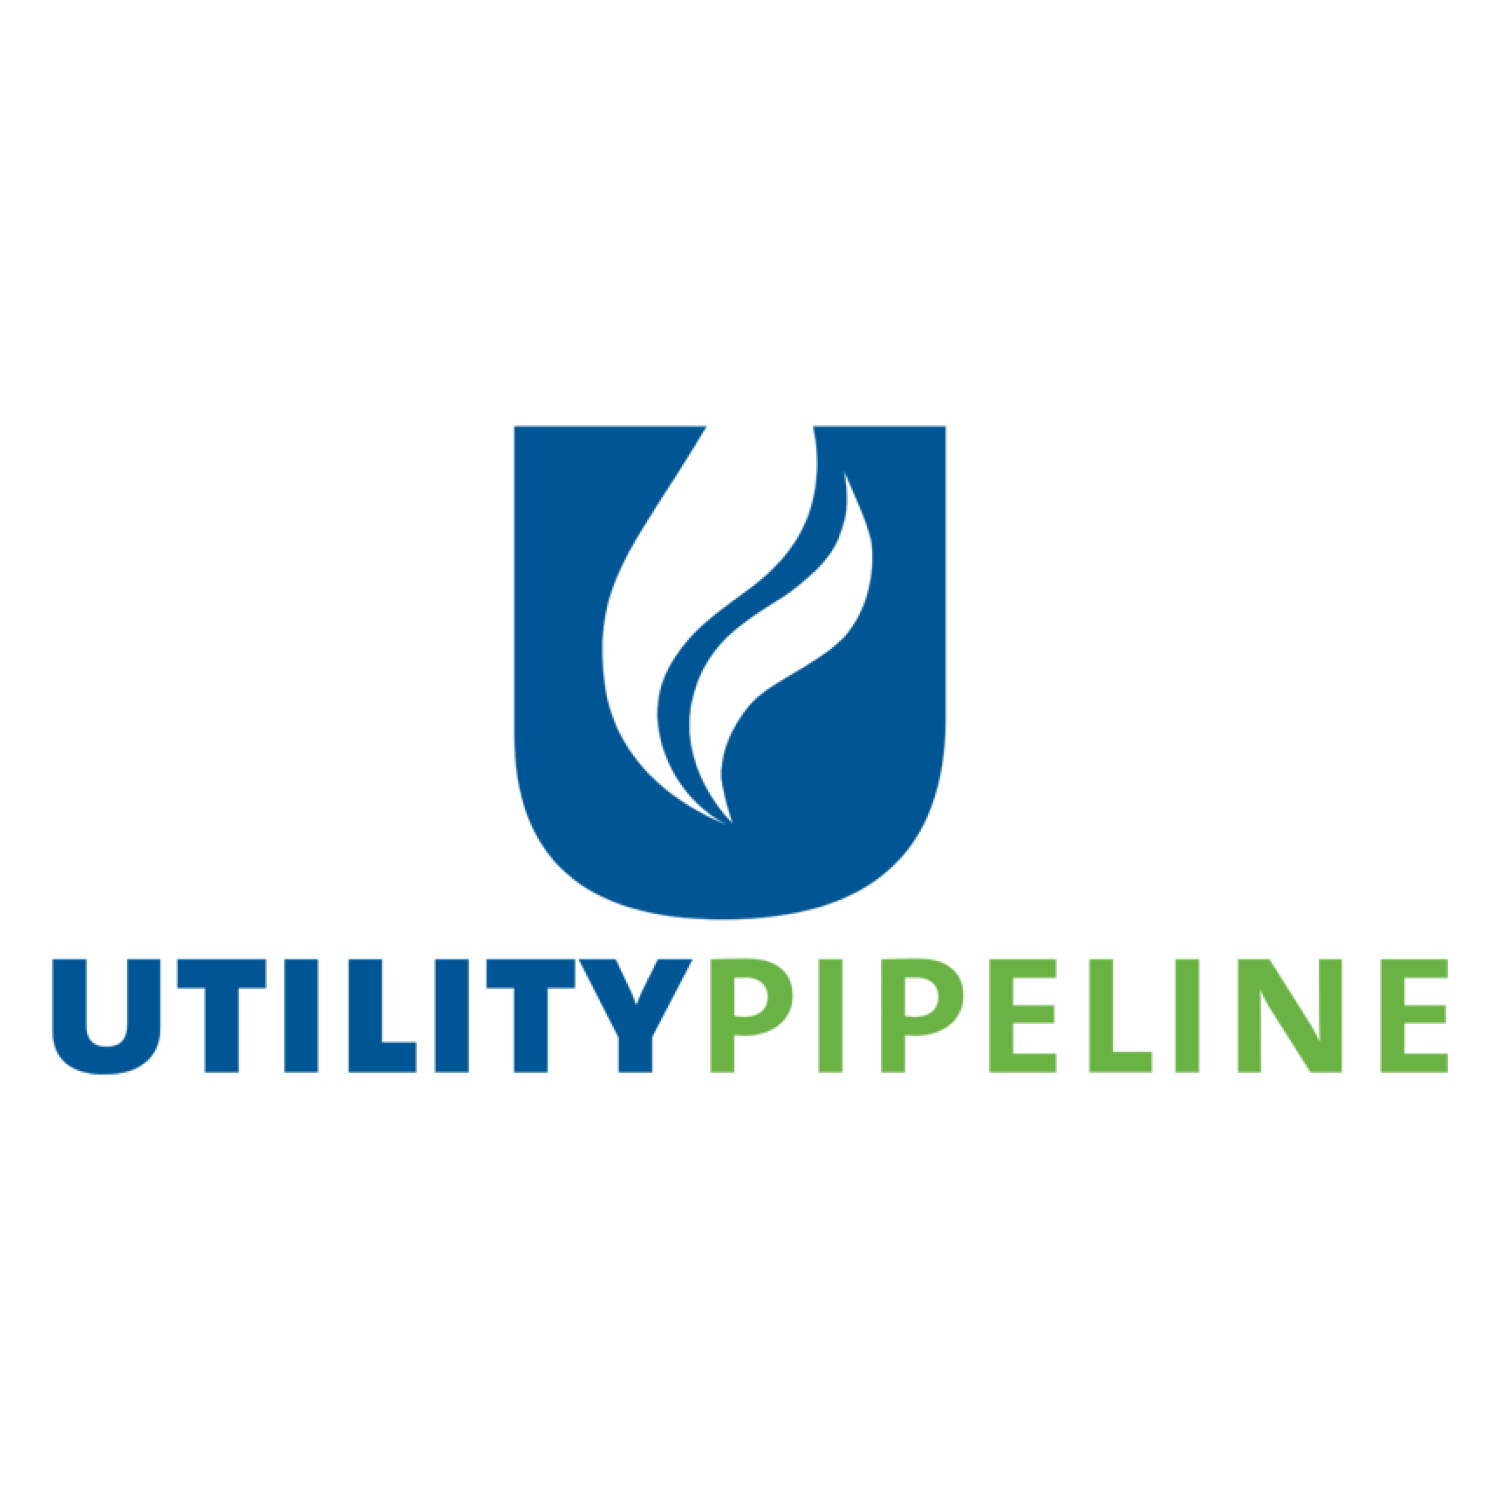 Utility Pipeline written in blue and green with a blue torch icon on a white background